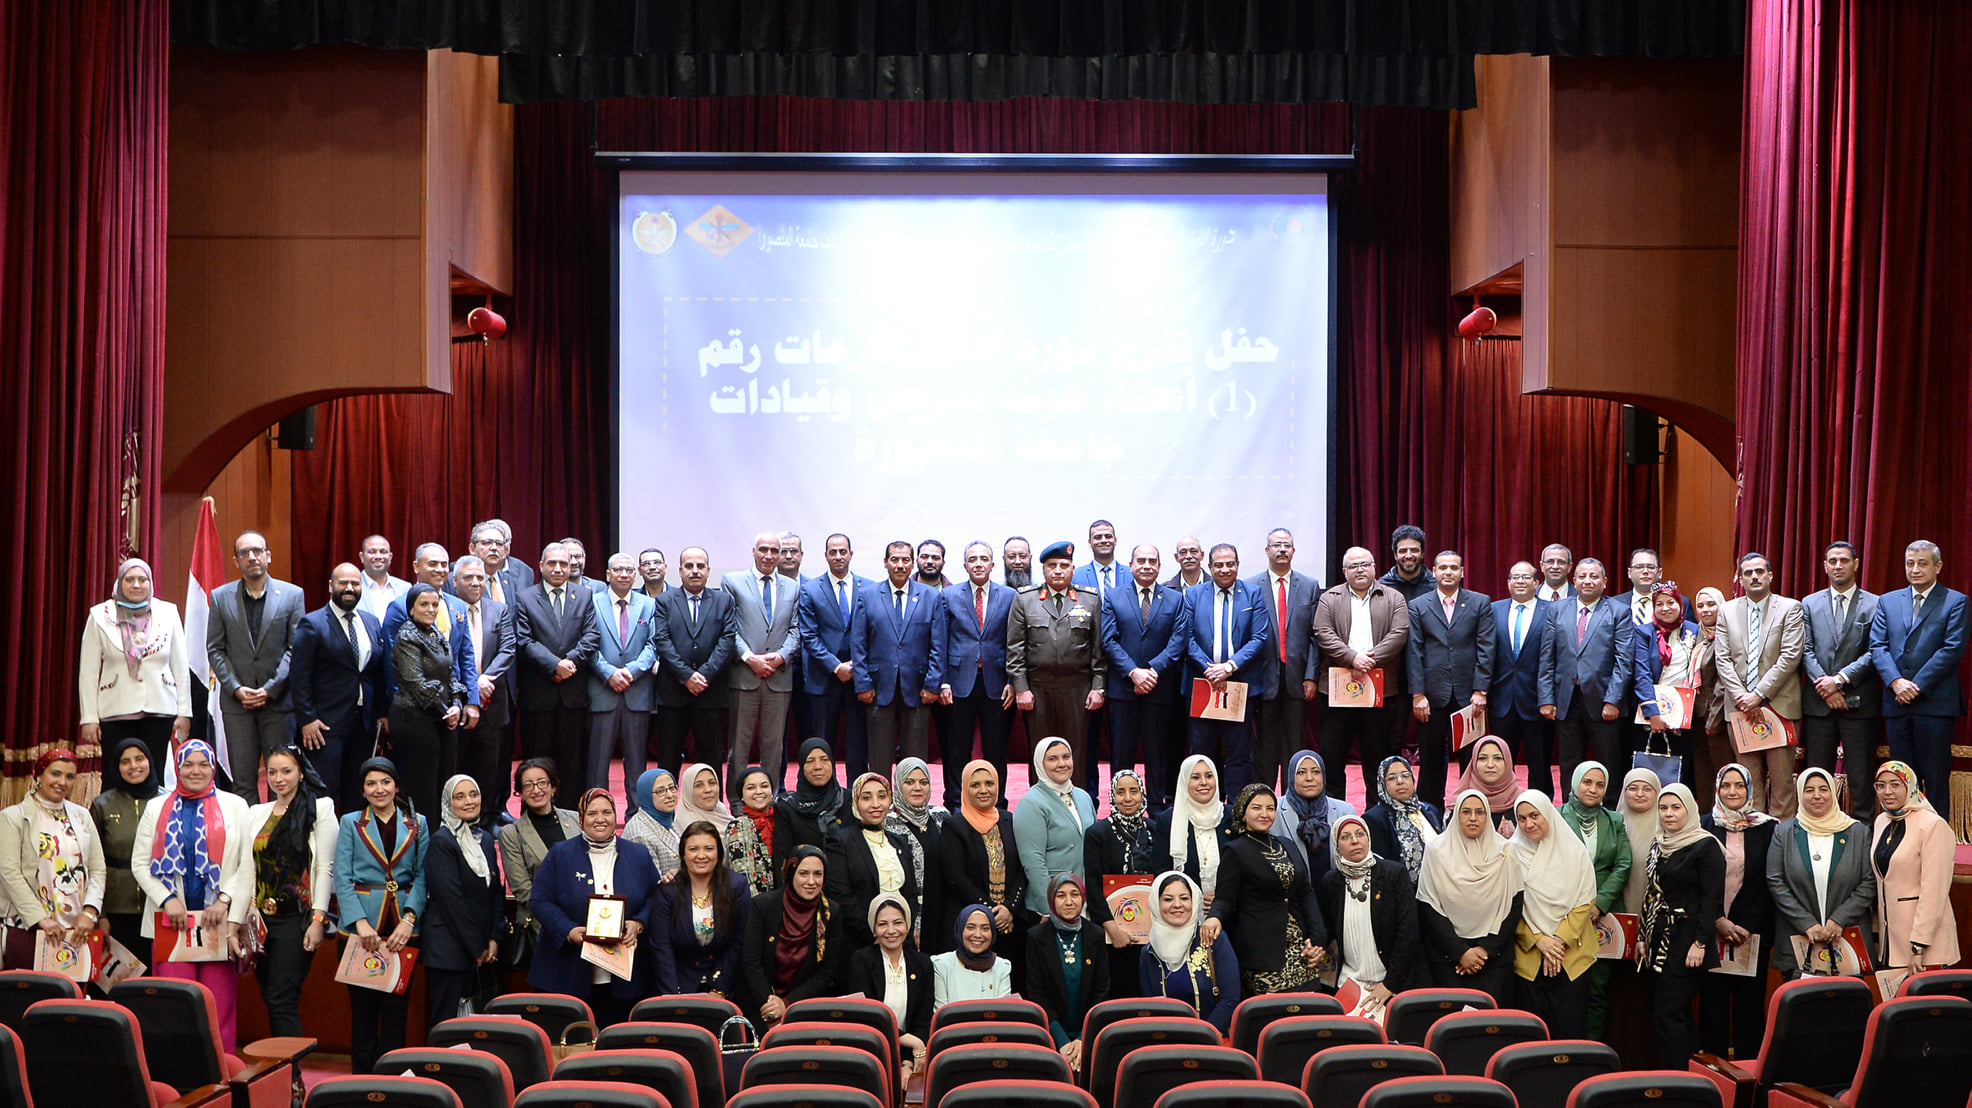 The Nasser Military Academy graduation ceremony for staff members of the Faculty of Agriculture Recipients of “Crisis Management Course”